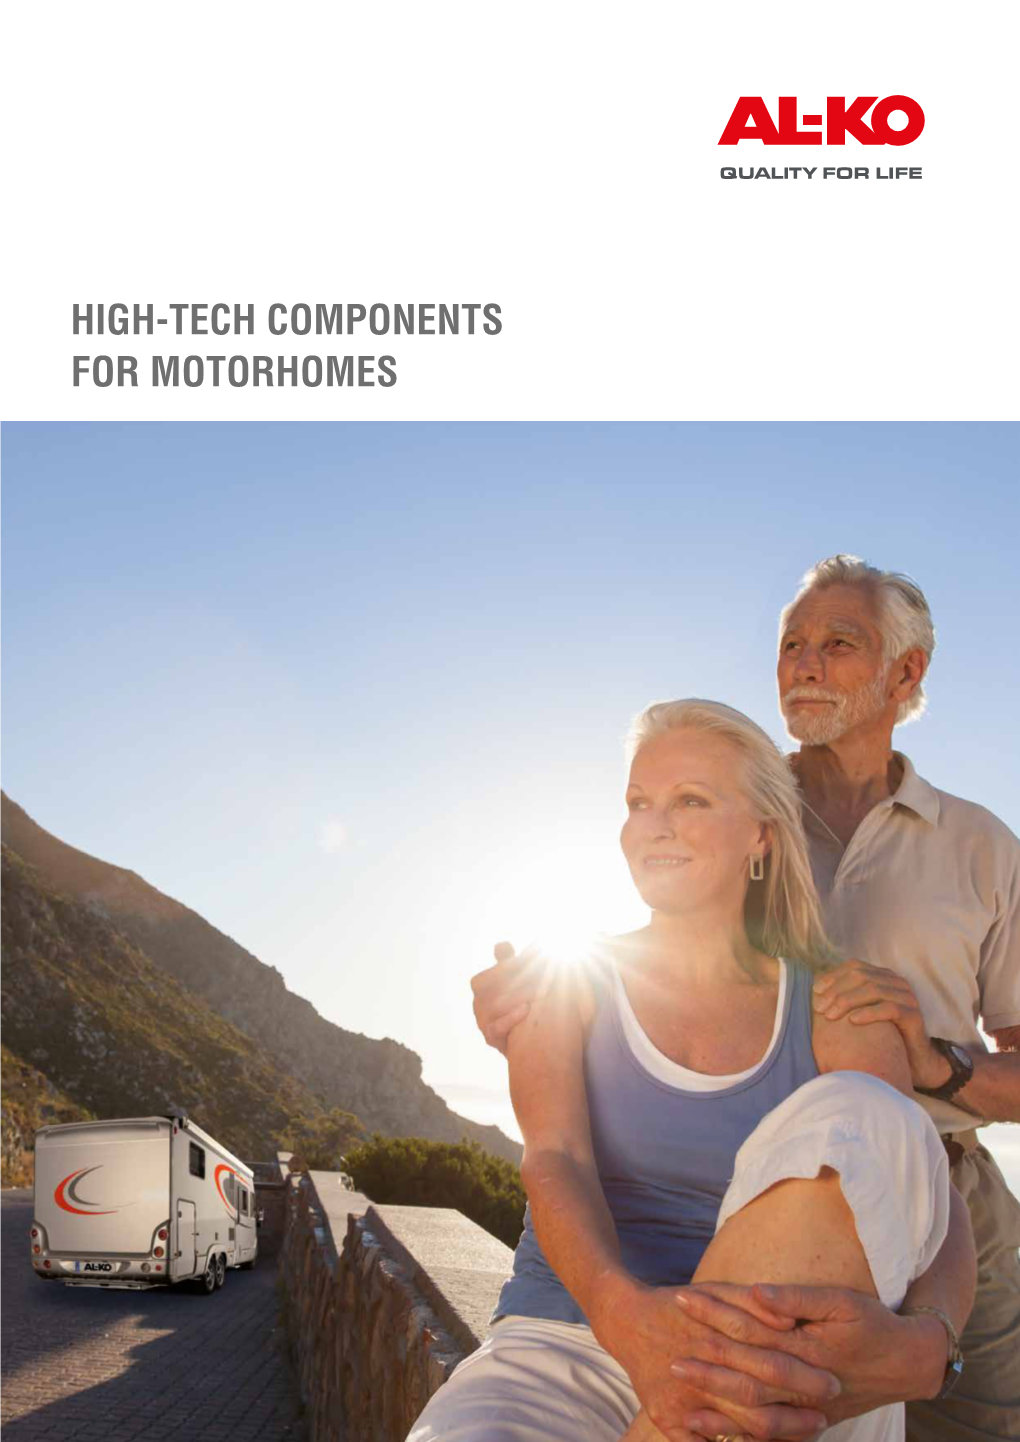 HIGH-TECH COMPONENTS for MOTORHOMES 2 I Page